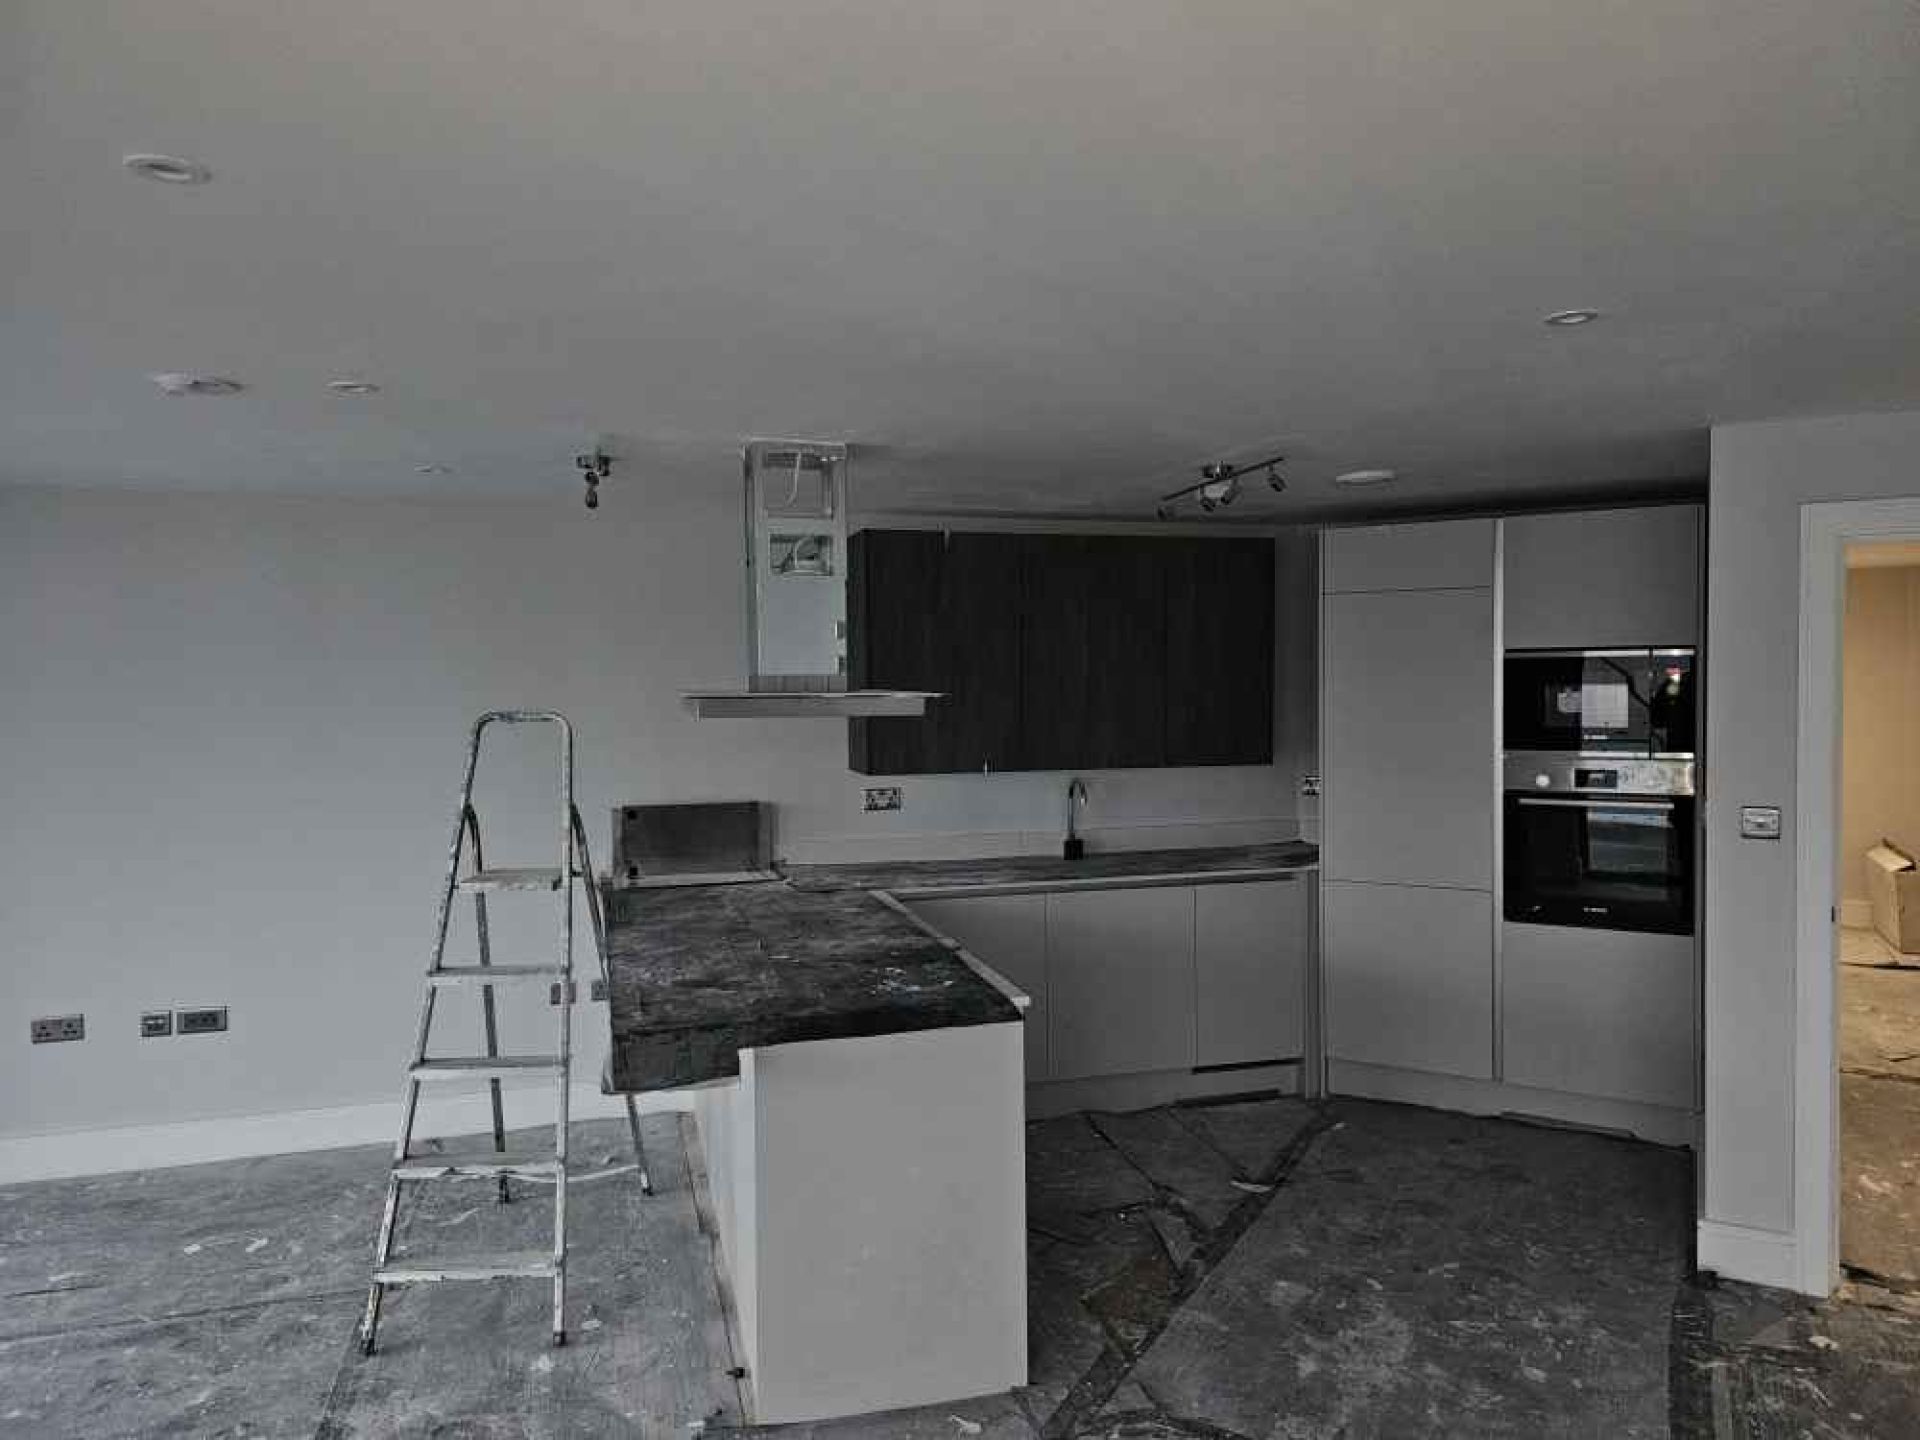 Open plan kitchen area at the halfway stage of development. Oven and cupboards being fitted.